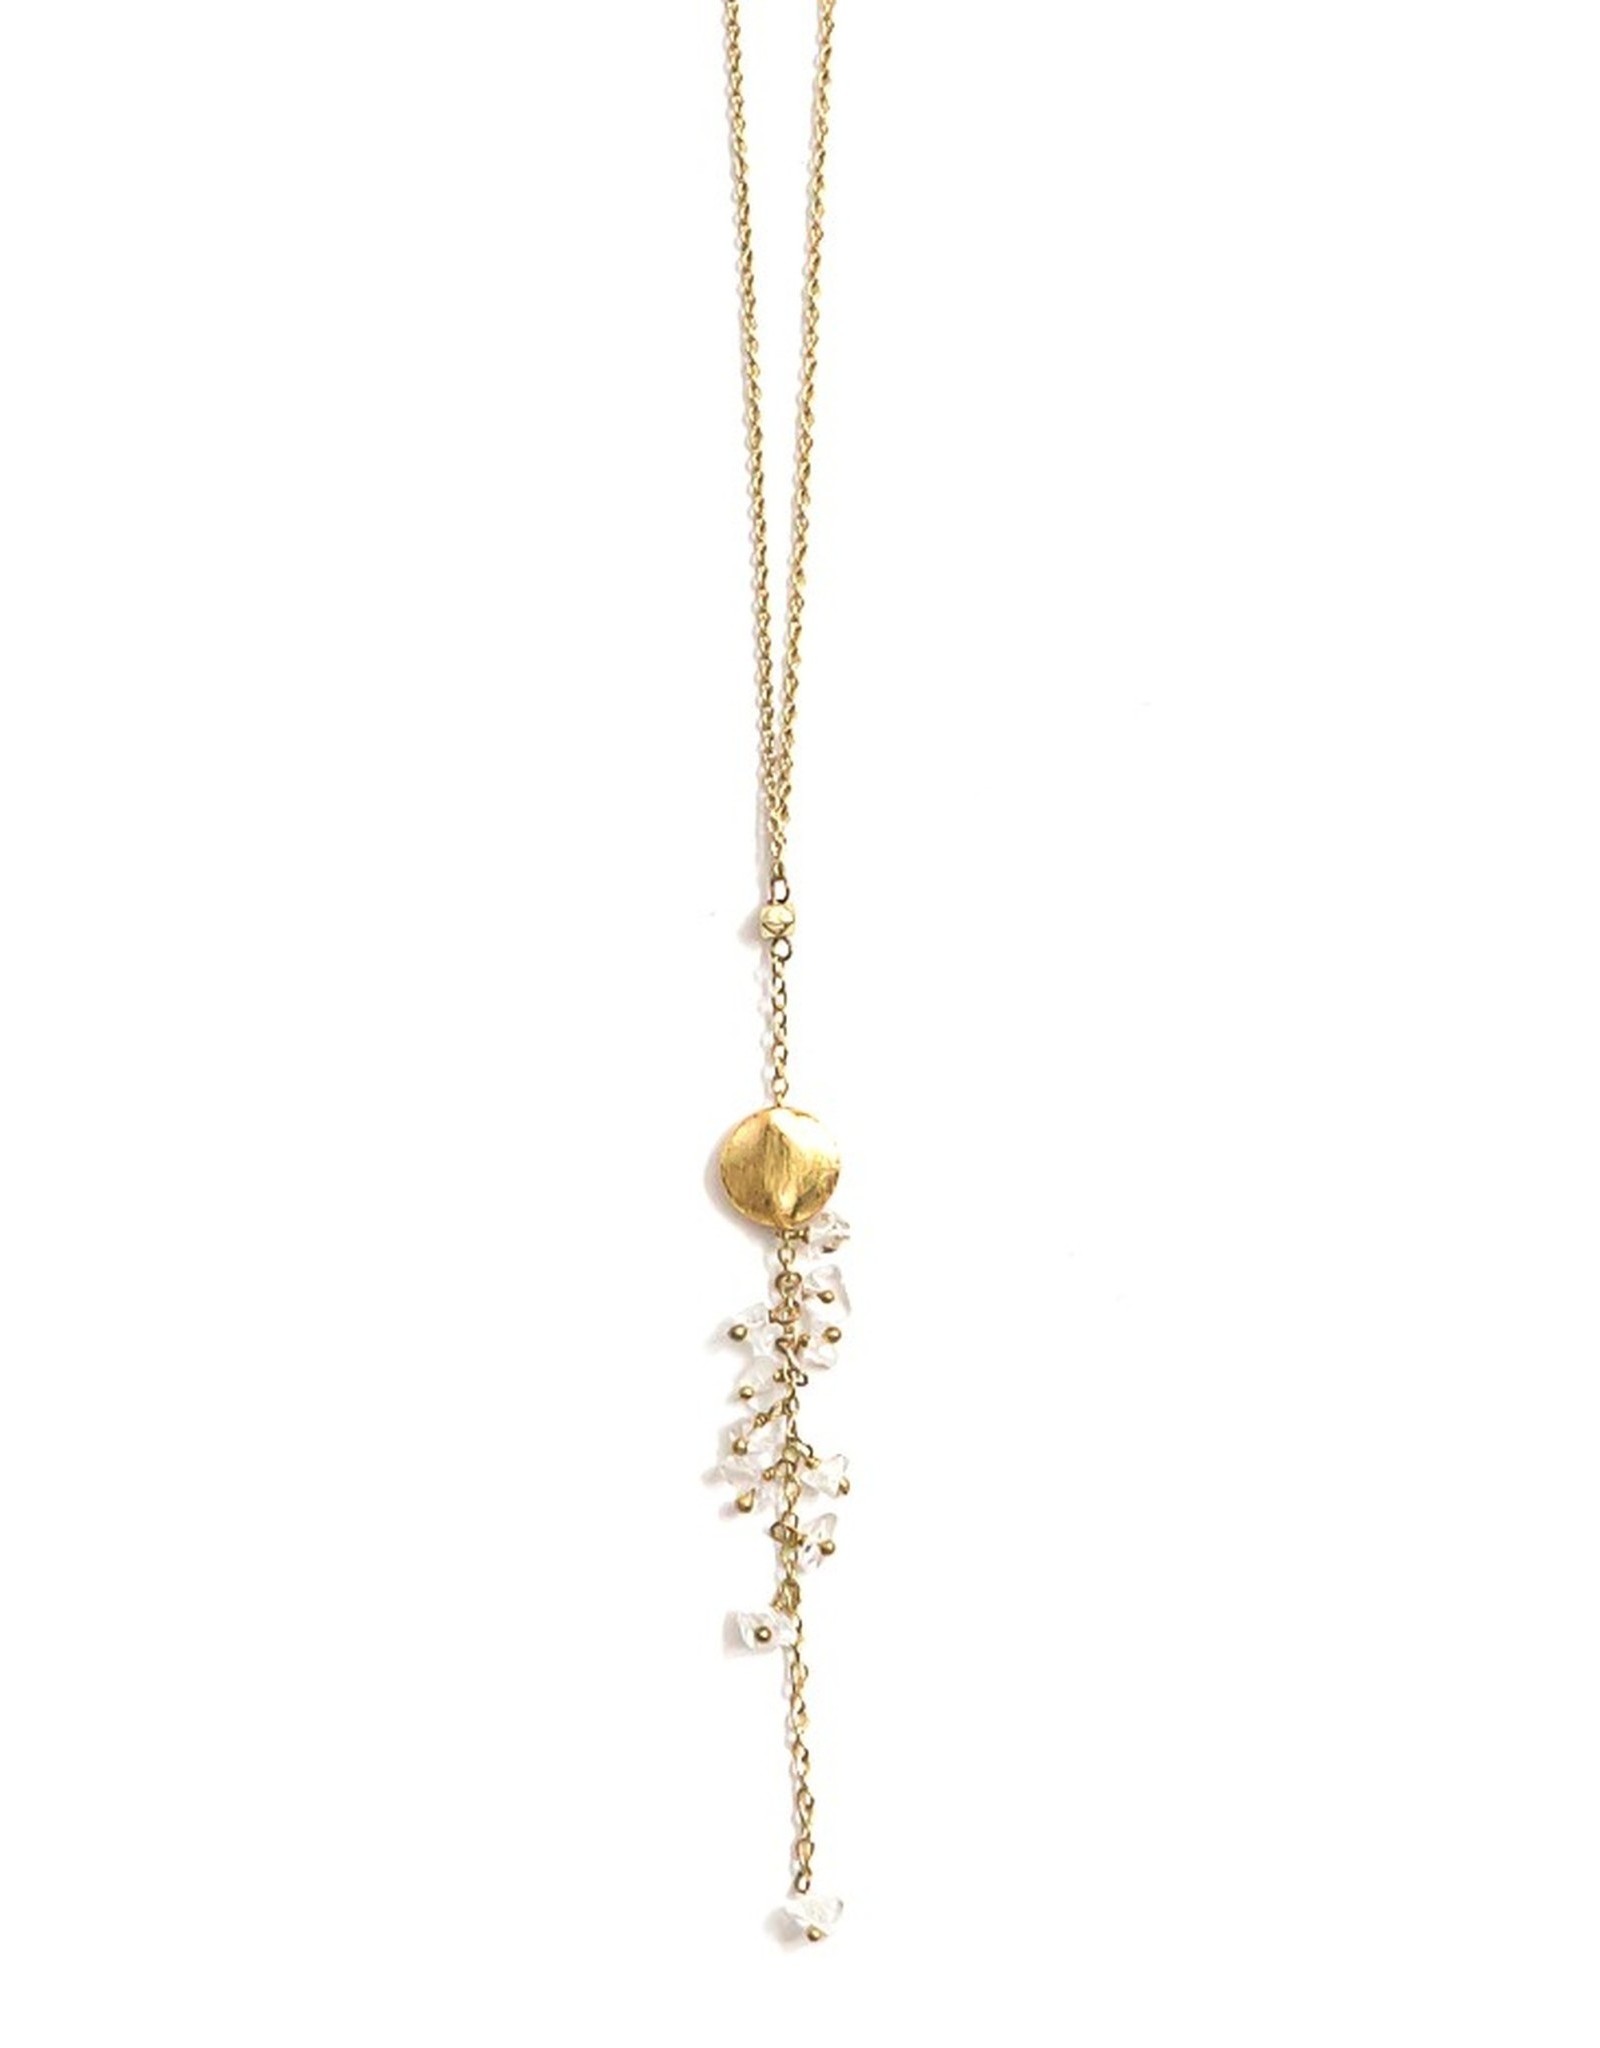 Delicate Dangling Stone Necklace, India